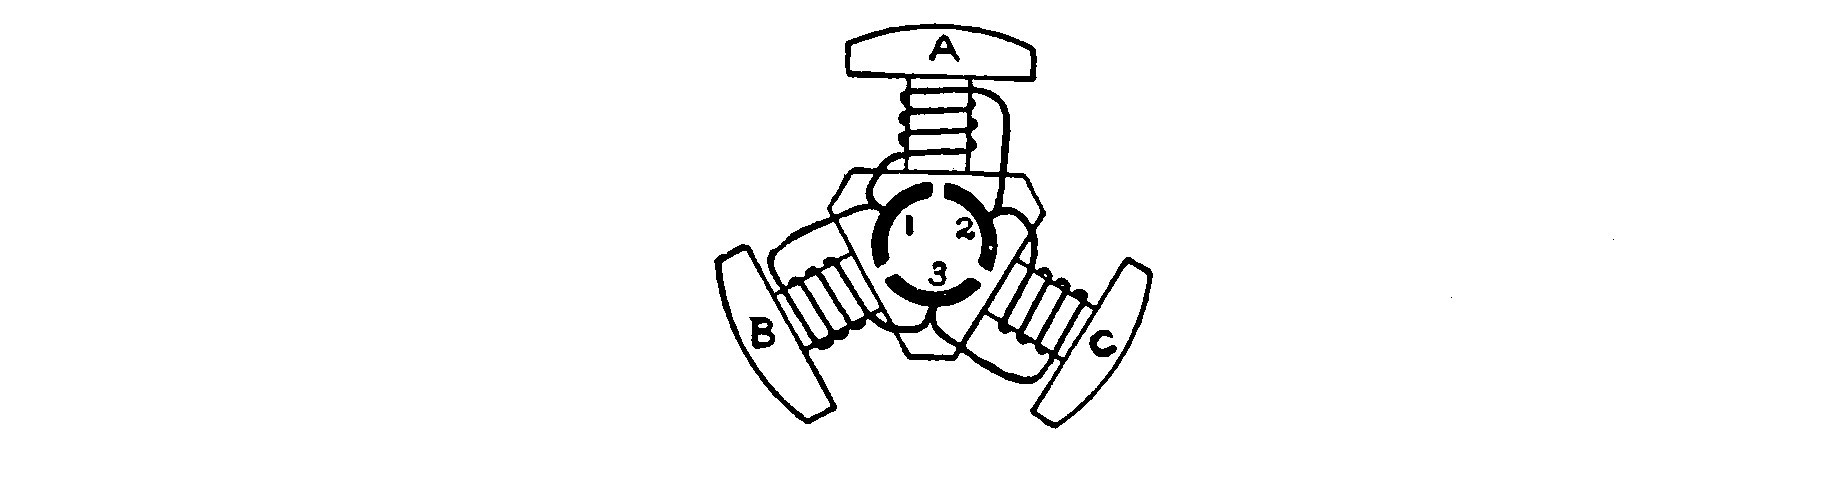 FIG. 63.—Showing how the Coils on a Three-pole Armature are connected to the Commutator.